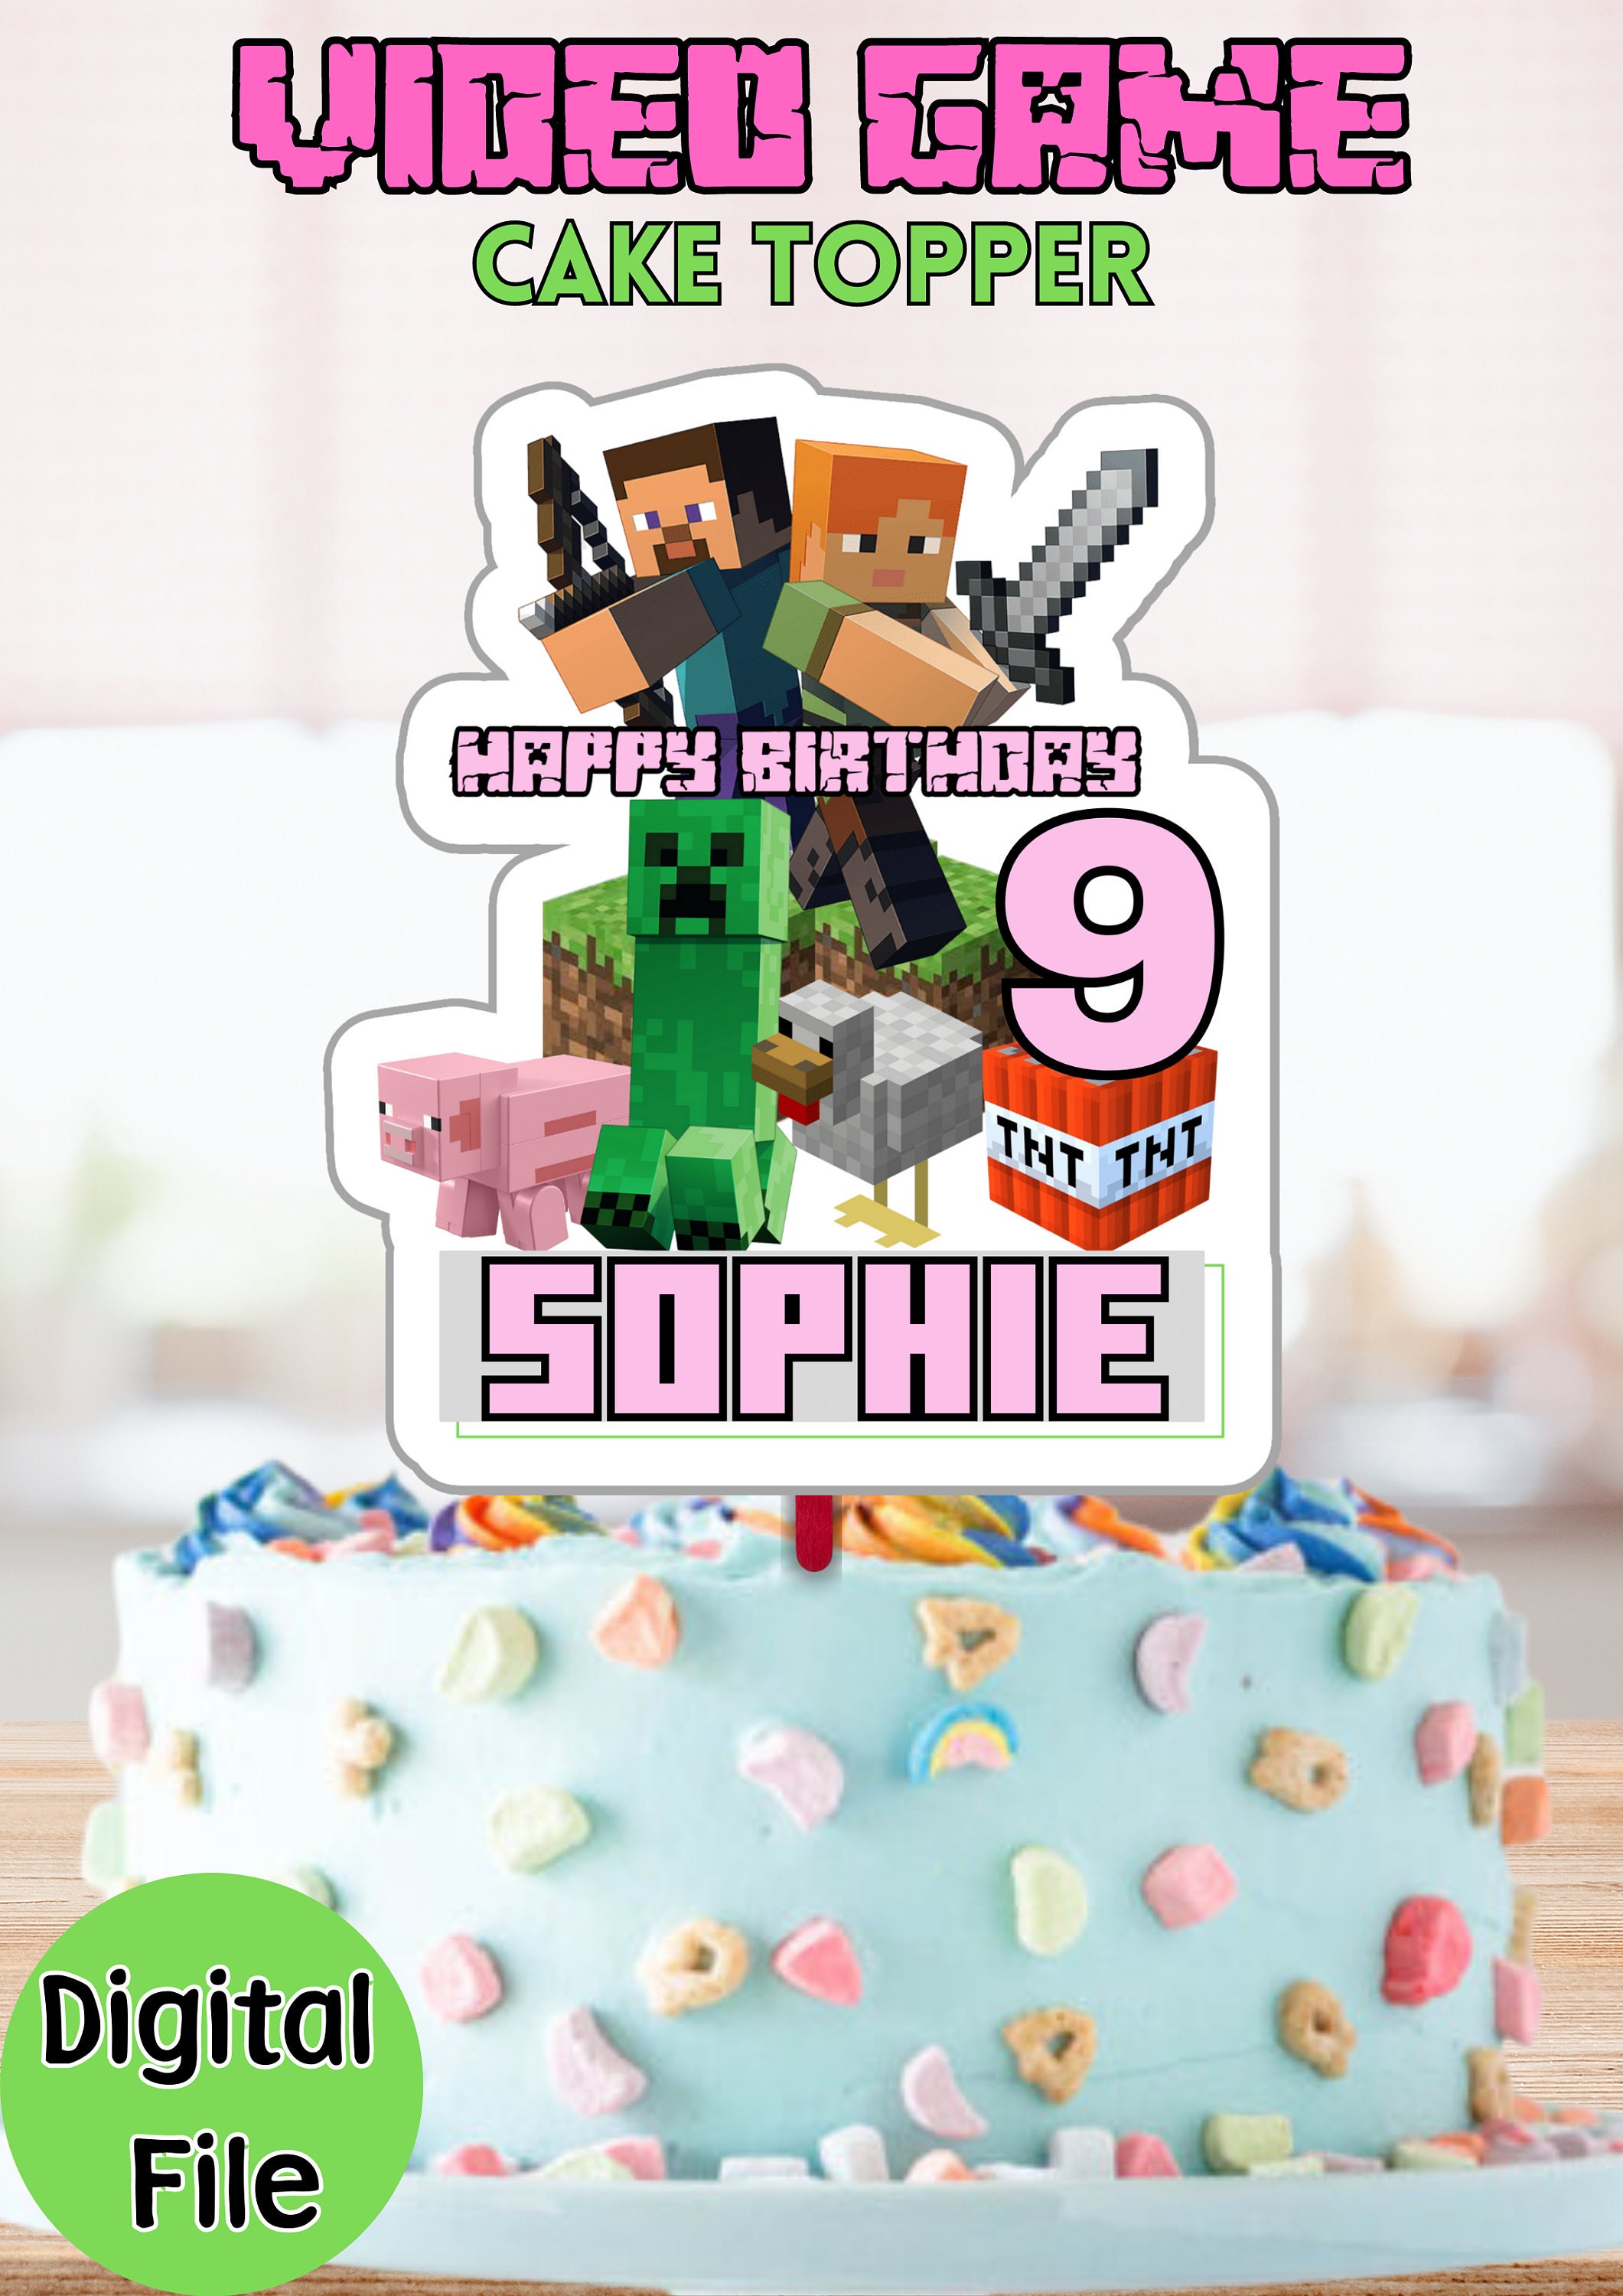 Roblox Girls Coffee-Tude Edible Cake Topper Image ABPID56519 – A